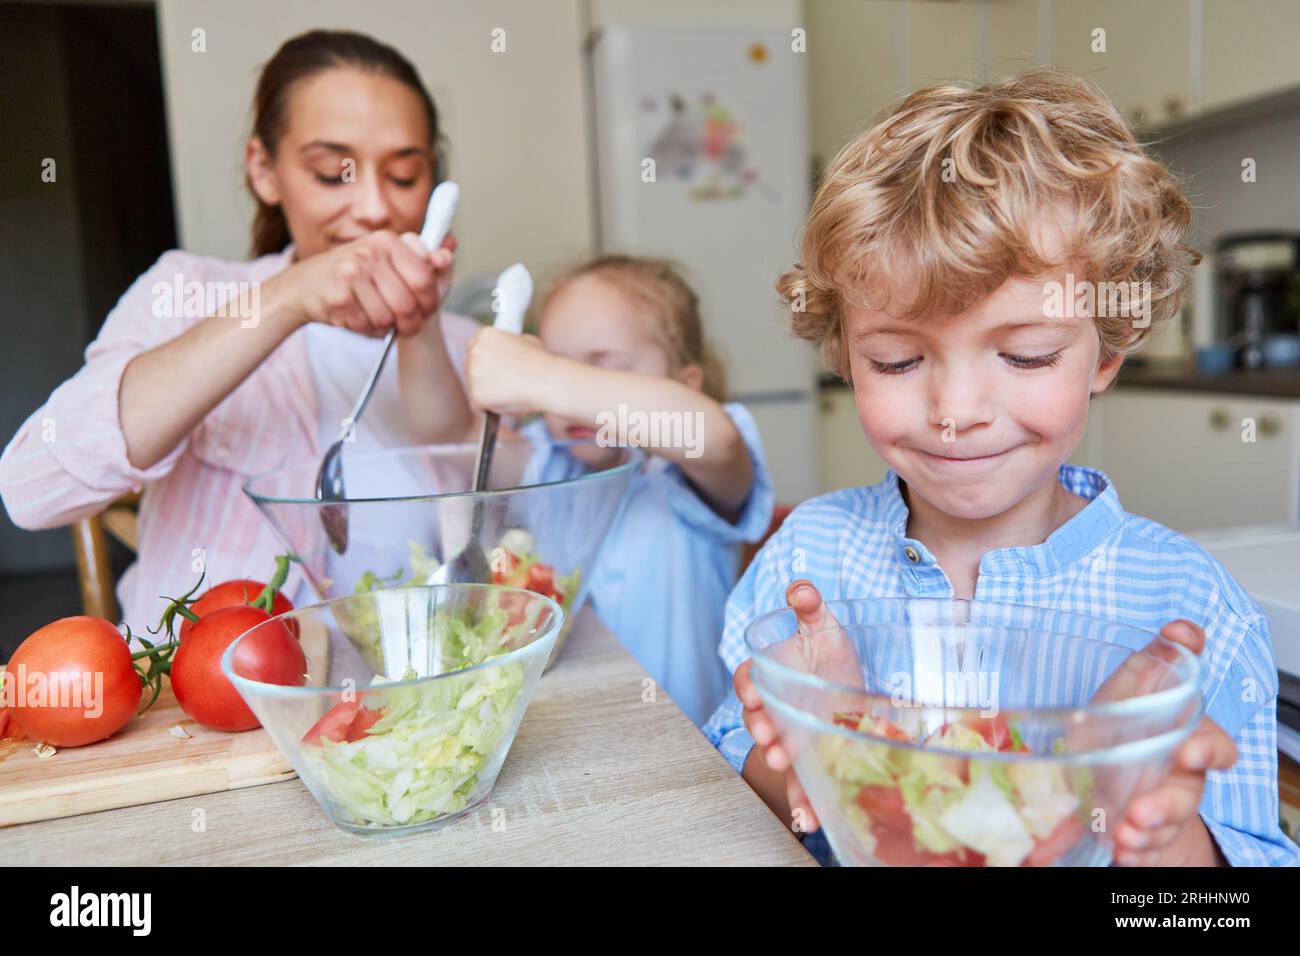 Smiling blond boy looking at salad bowl with mother and daughter making food at home Stock Photo